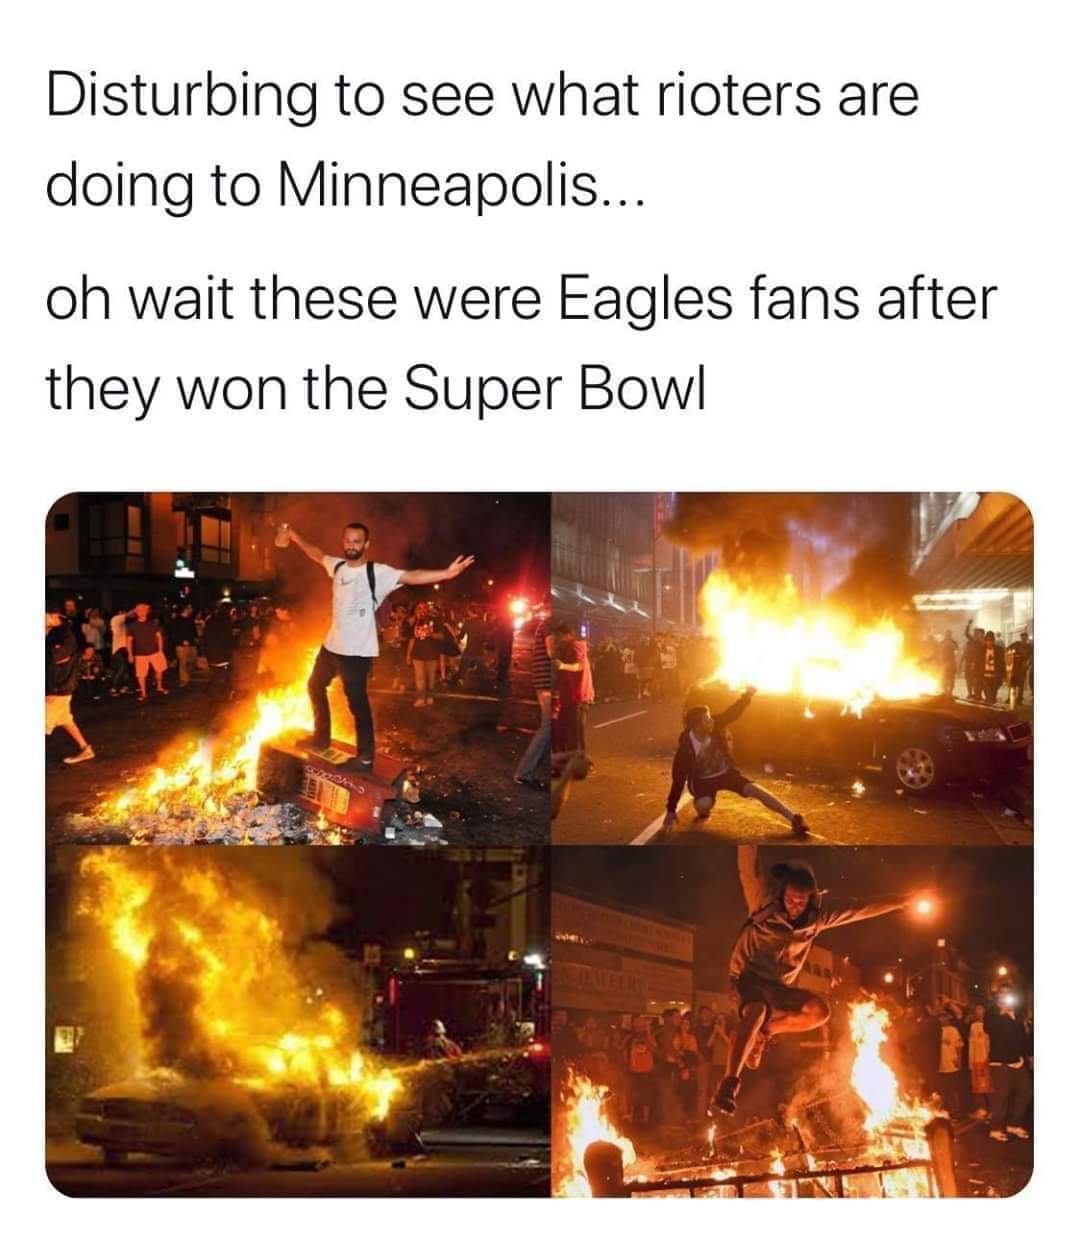 heat - Disturbing to see what rioters are doing to Minneapolis... oh wait these were Eagles fans after they won the Super Bowl